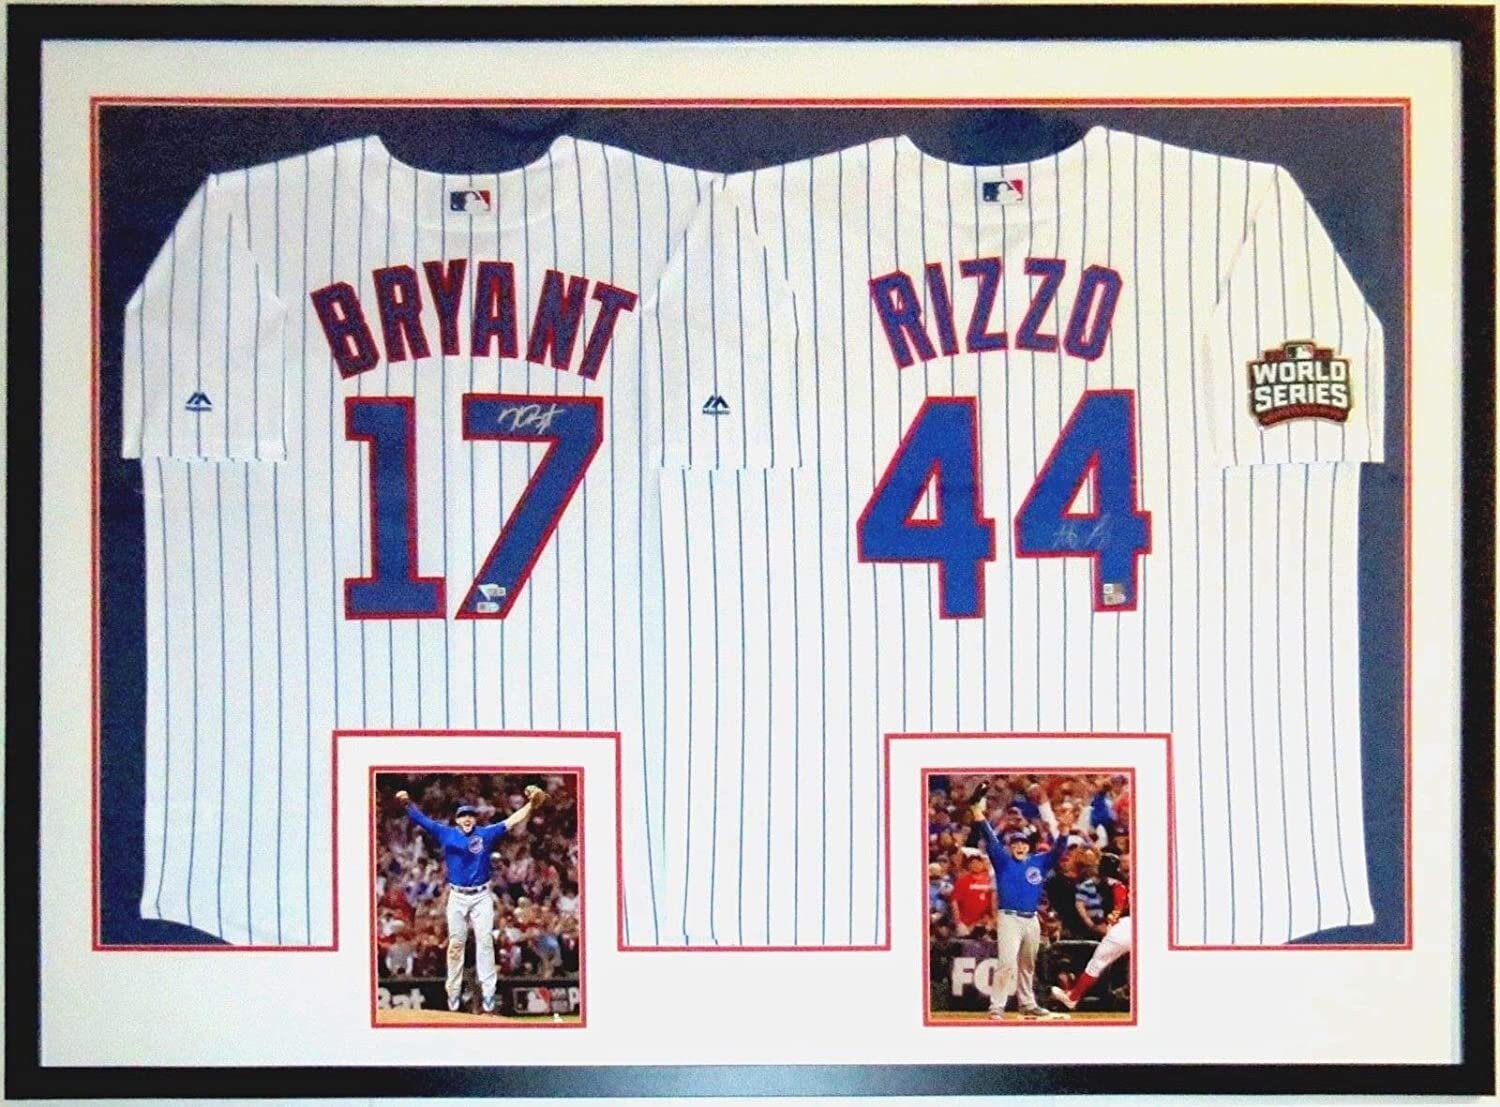 anthony rizzo autographed jersey